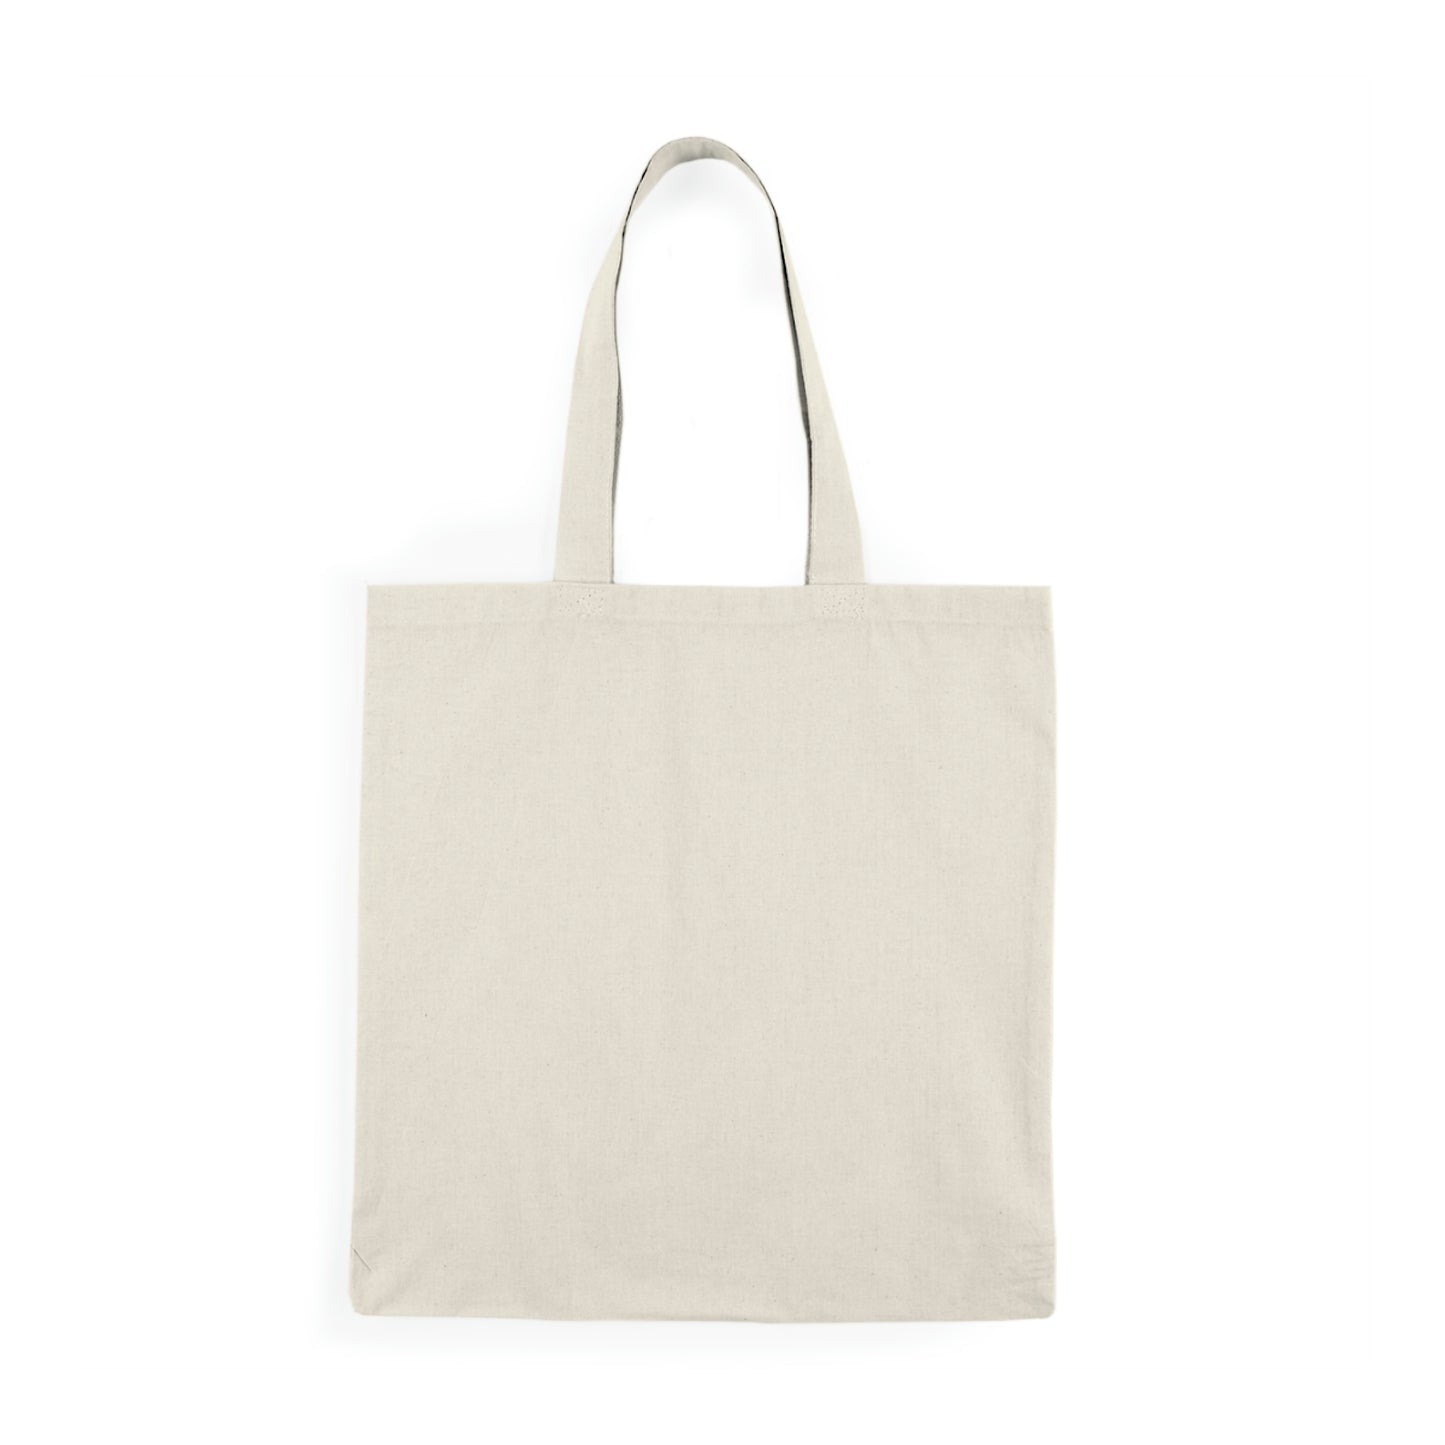 Now And Always - Natural Tote Bag